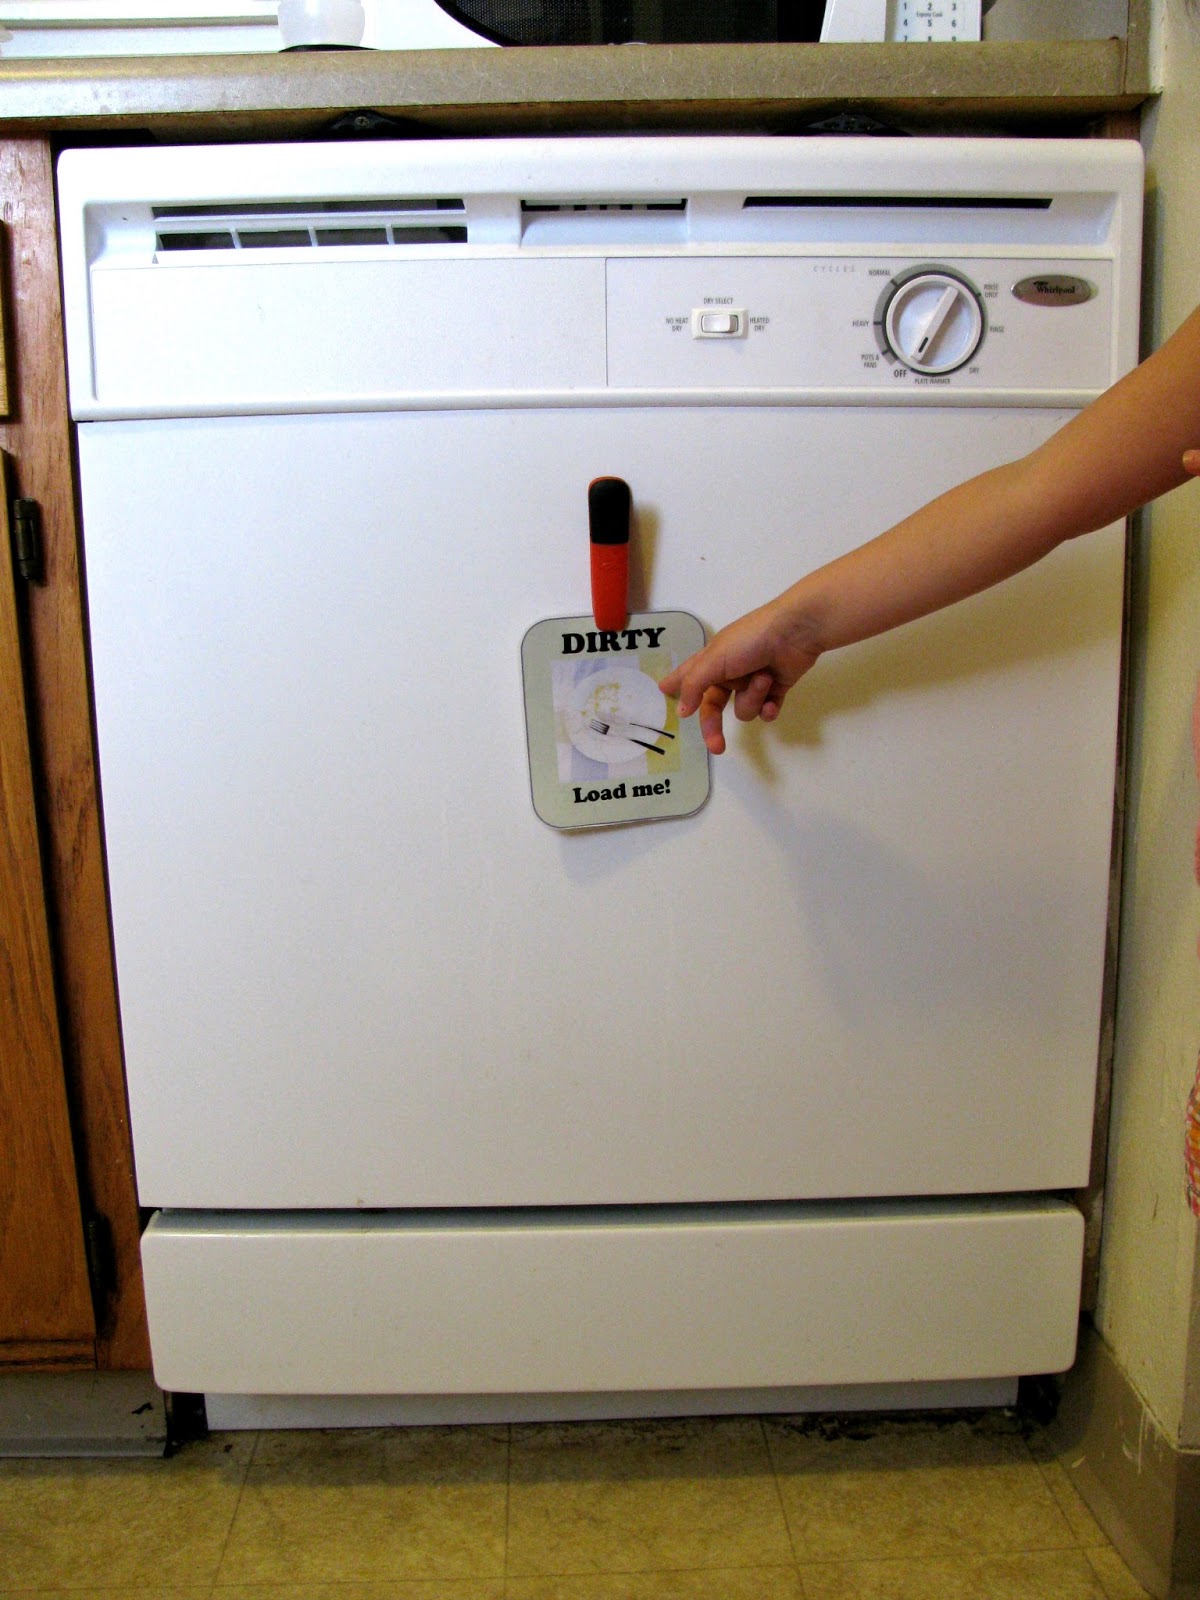 clean-dirty-dishwasher-magnet-sign-indicator-thumbs-up-etsy